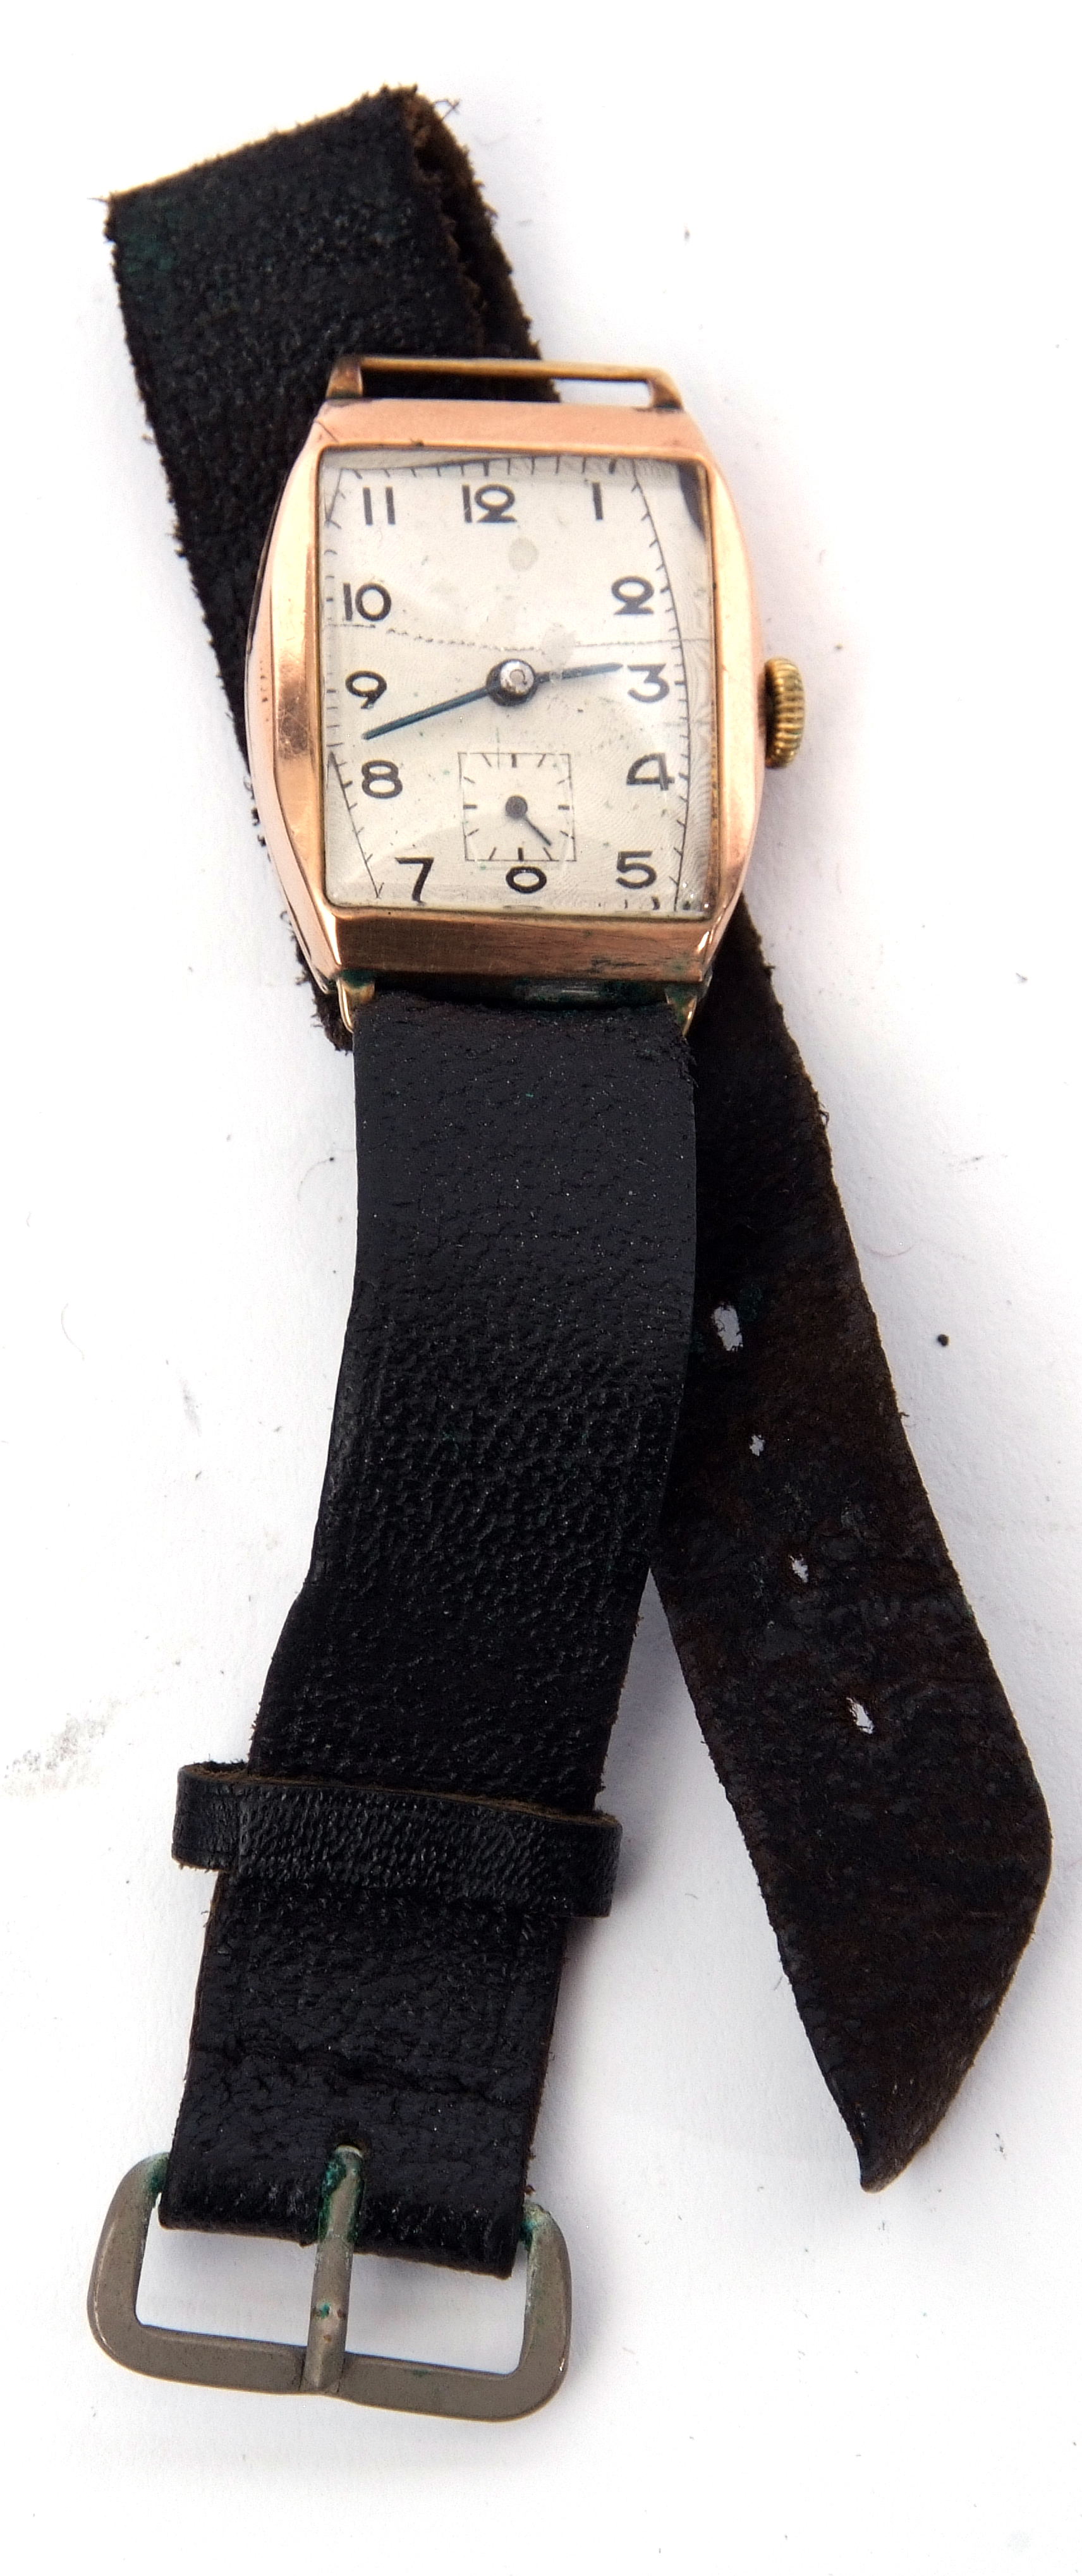 Gent's vintage hallmarked 9ct gold wrist watch, the un-named Swiss movement with blued steel hands